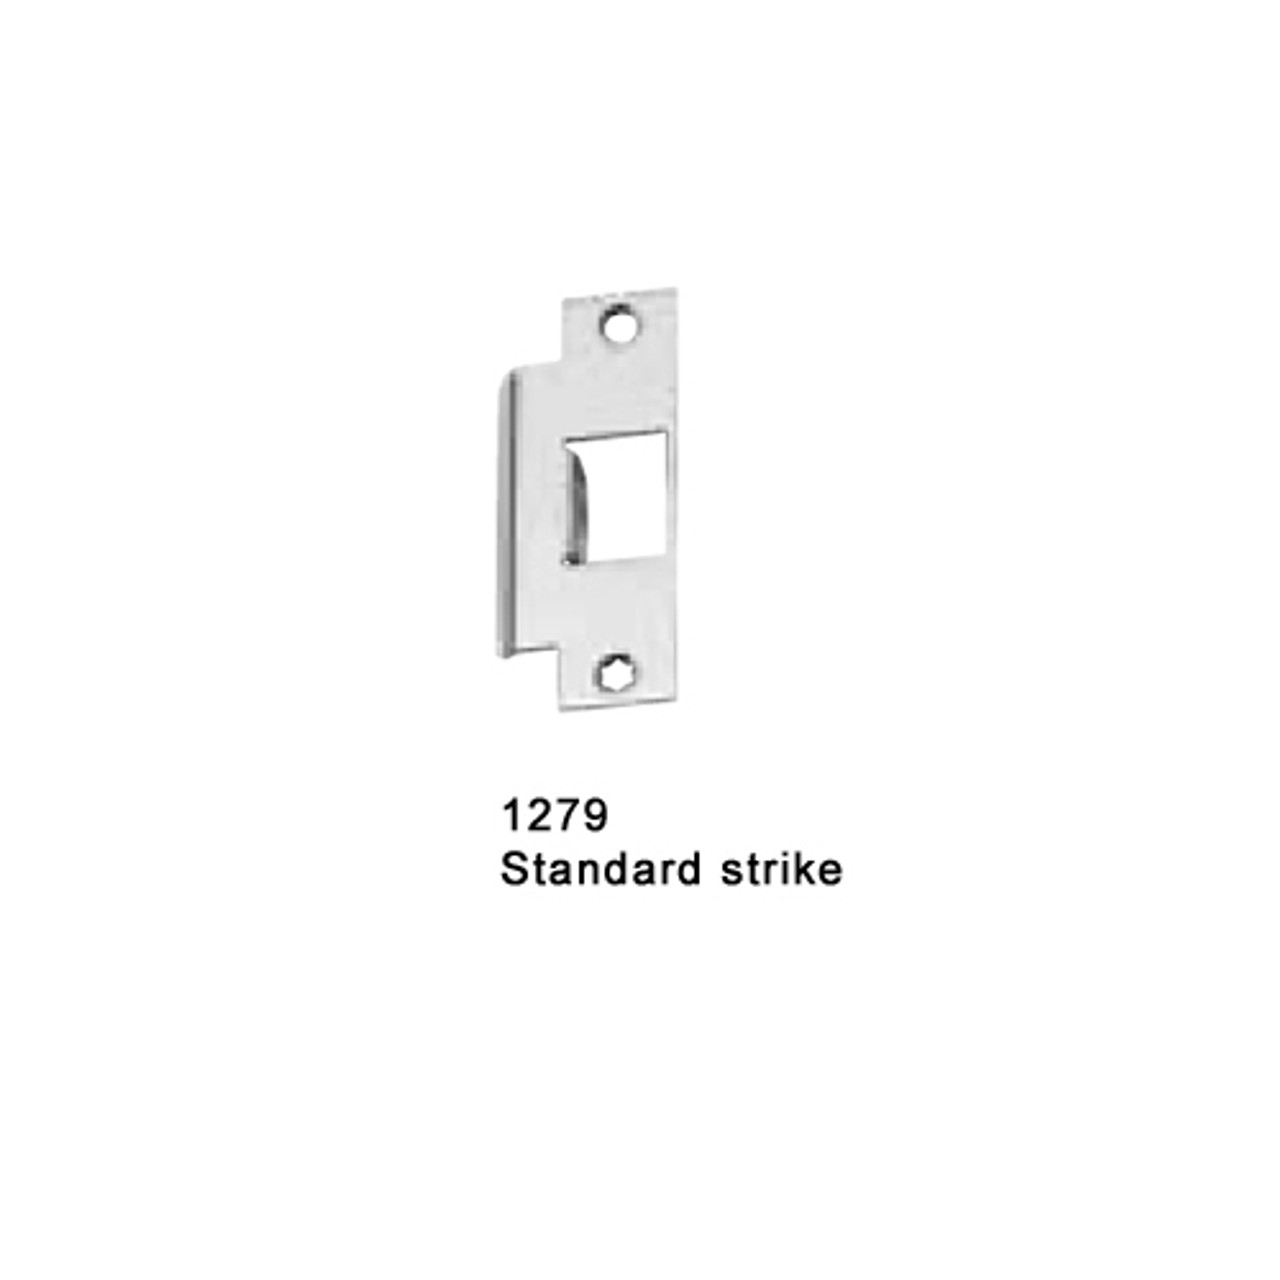 F-25-M-TP-US28-4-LHR Falcon 25 Series Fire Rated Mortise Lock Devices with 512TP Thumbpiece Trim in Anodized Aluminum